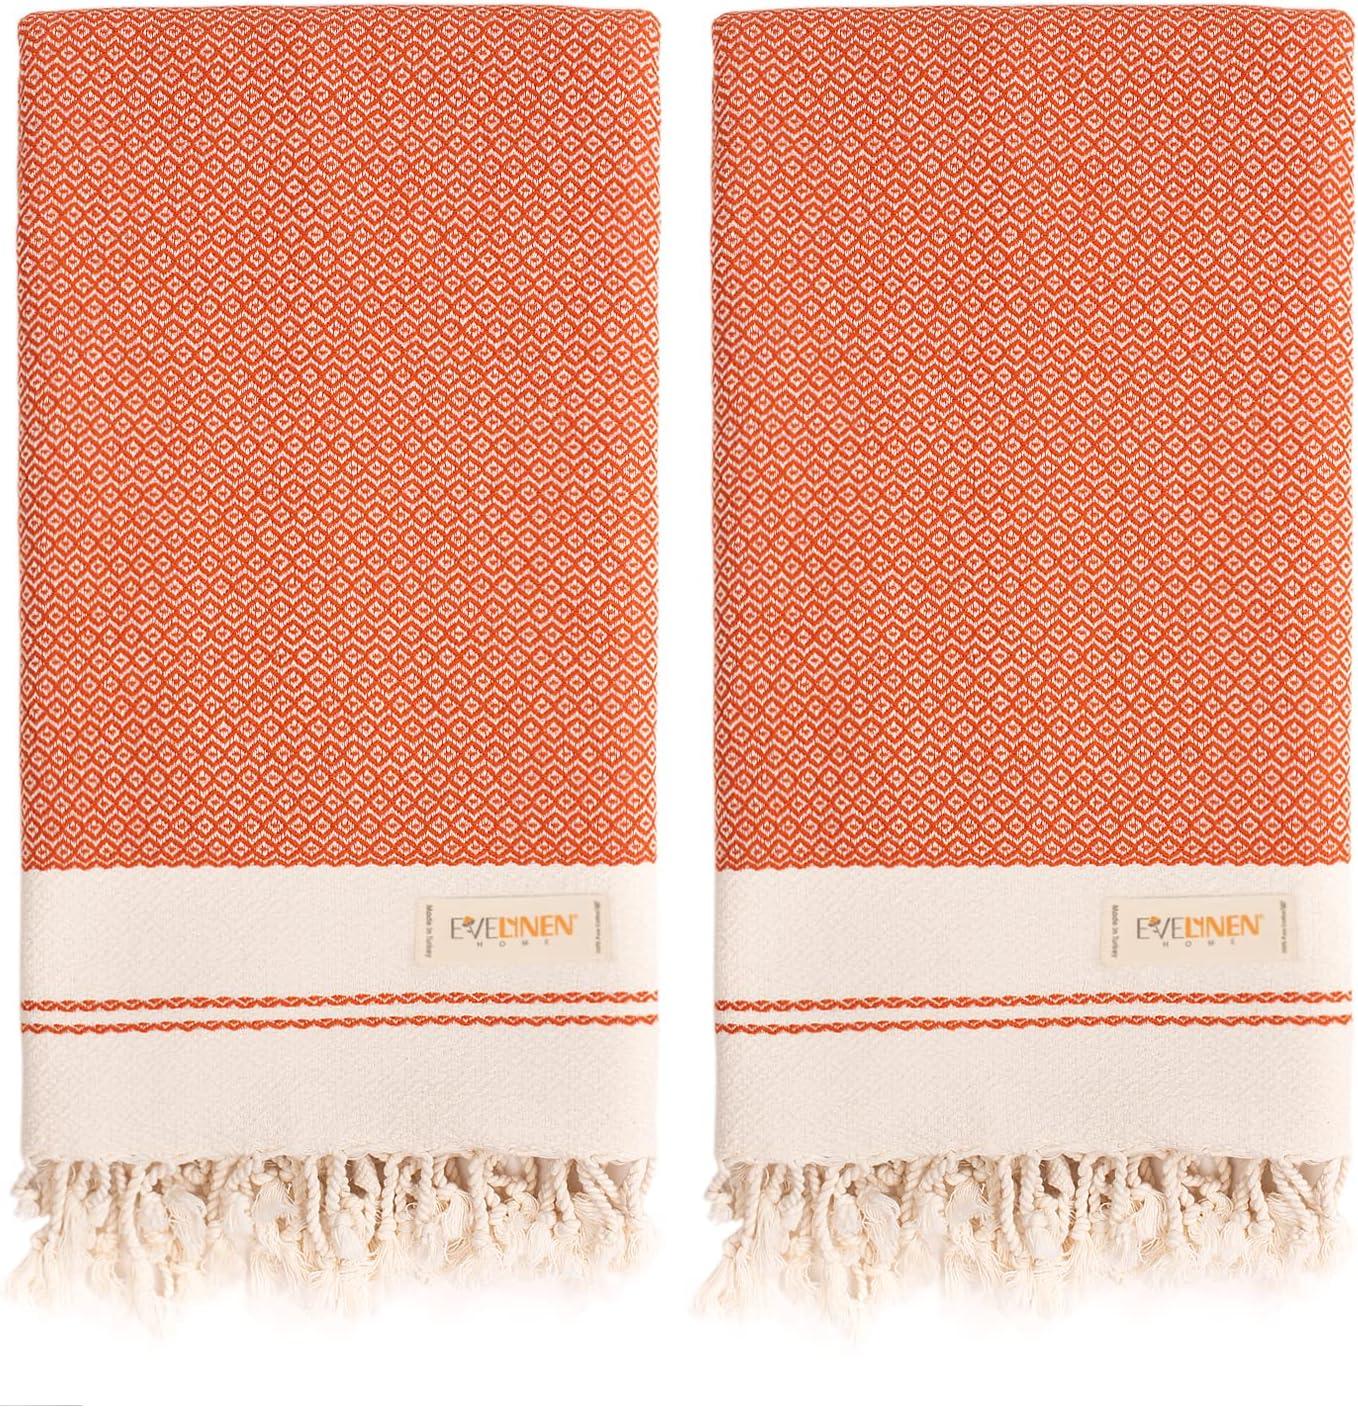 Evelynen Turkish Hand Towels for Bathroom and Kitchen (Set of 2) Decor